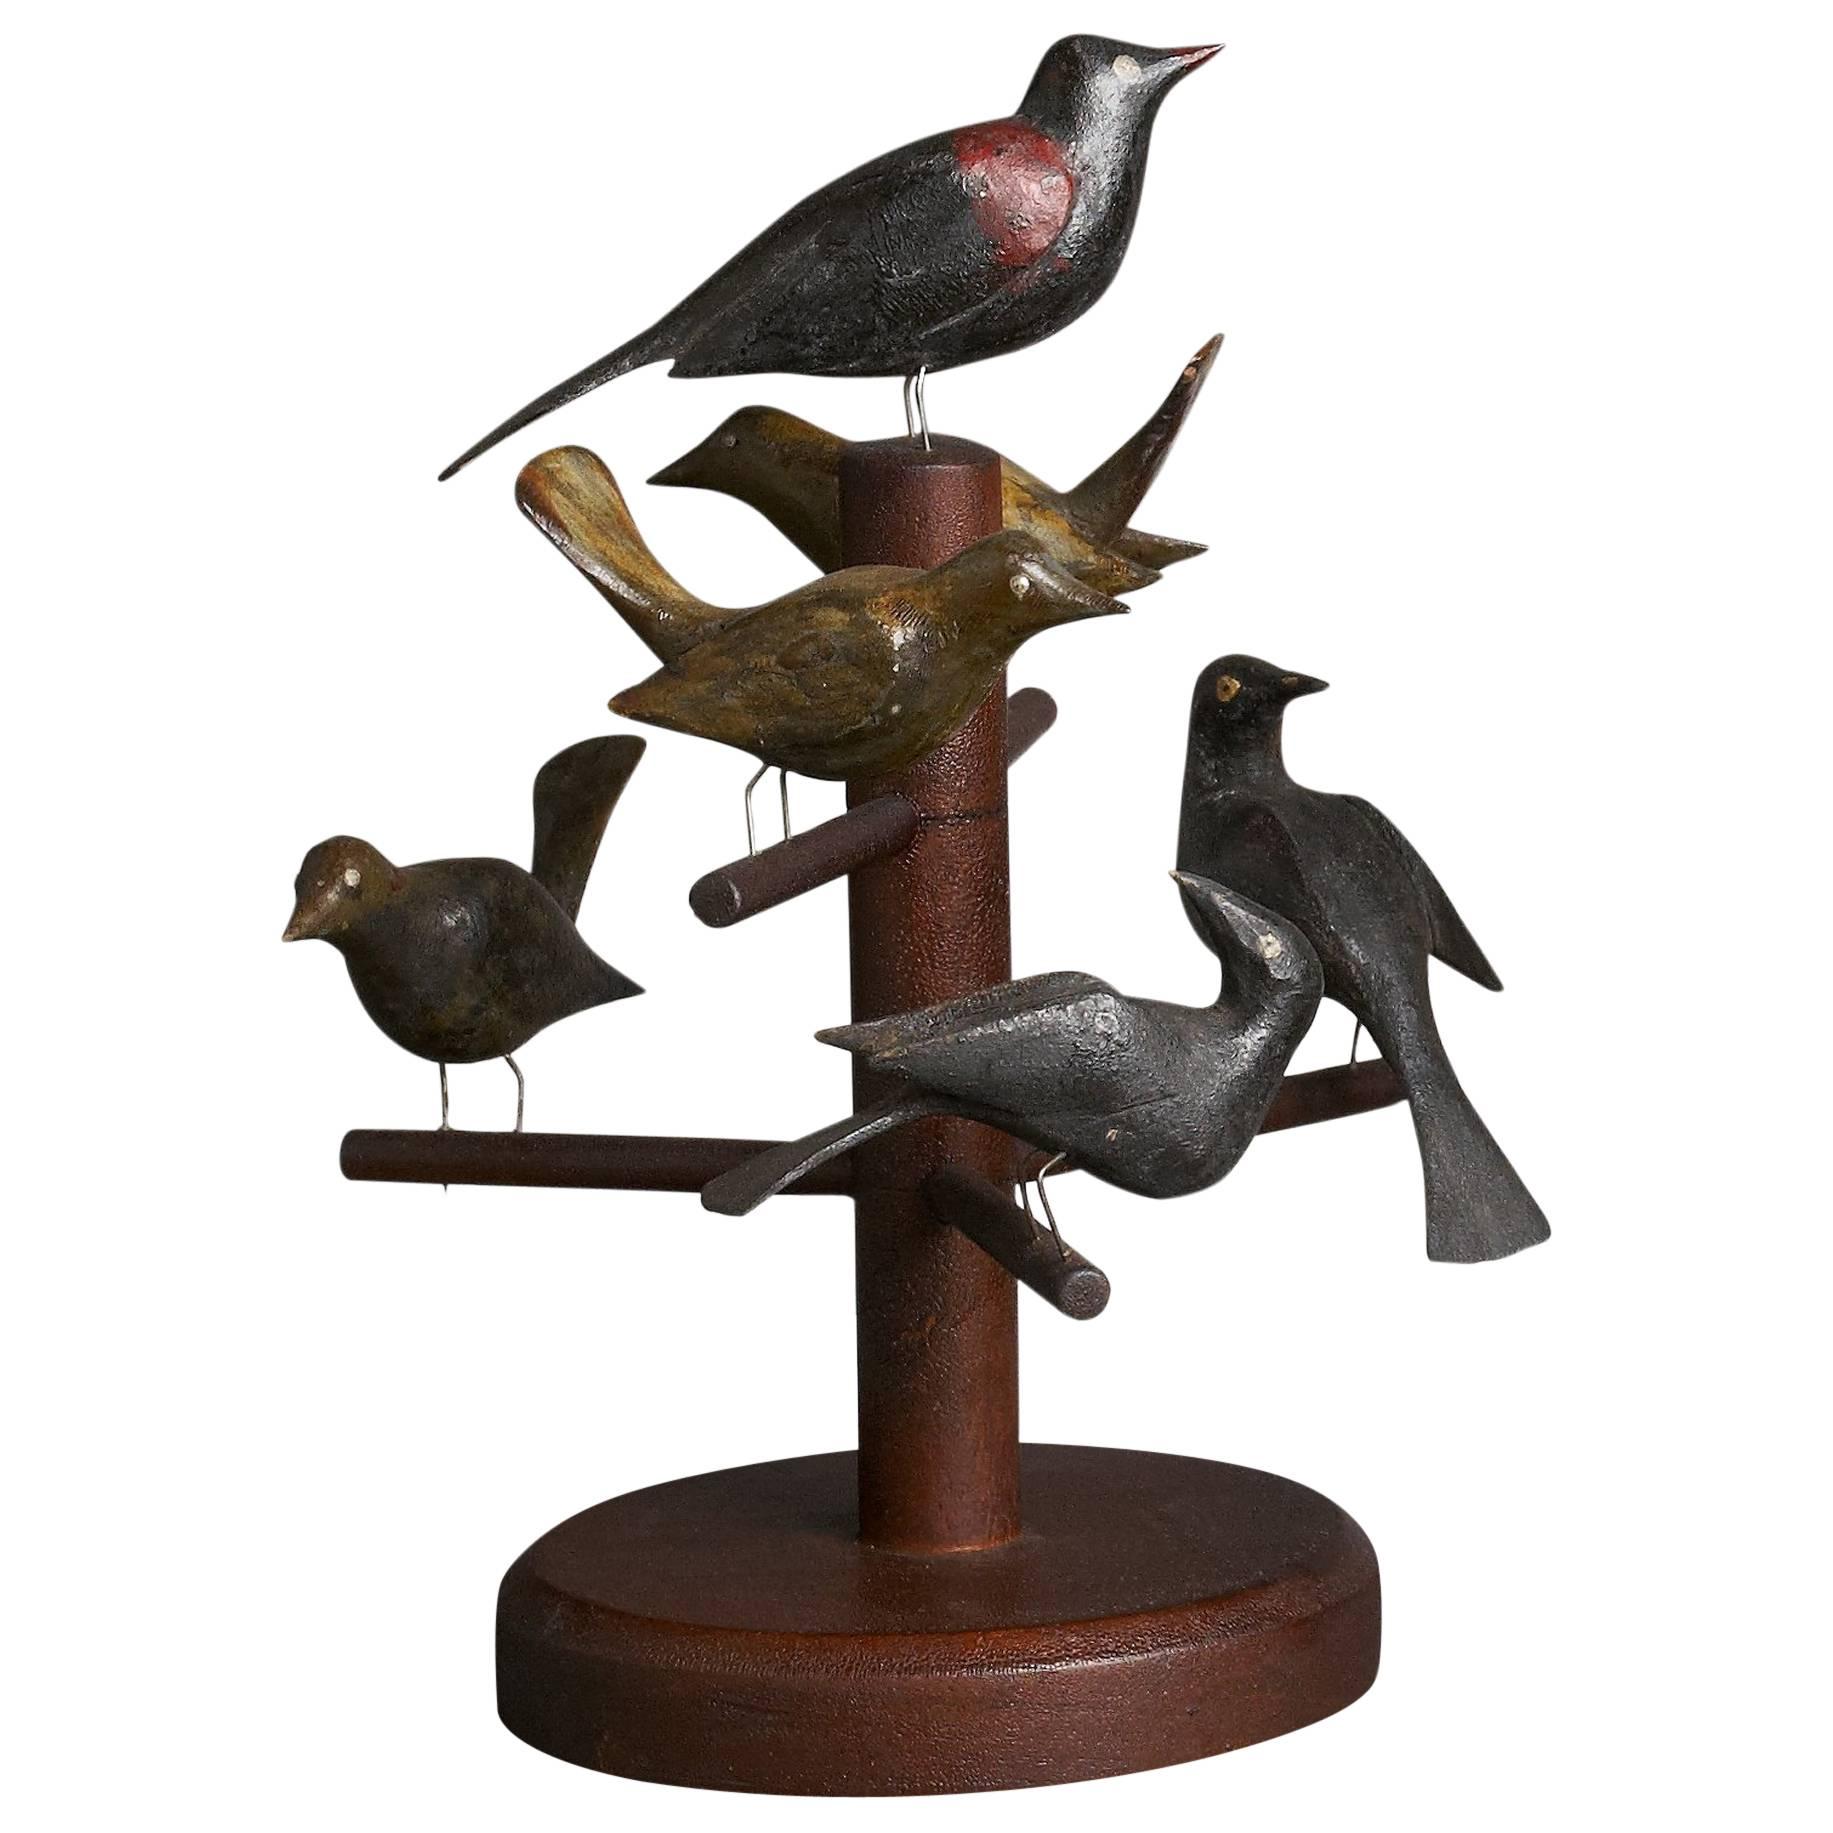 Six Carved and Polychrome-Decorated Pine Birds Mounted on a Tree For Sale